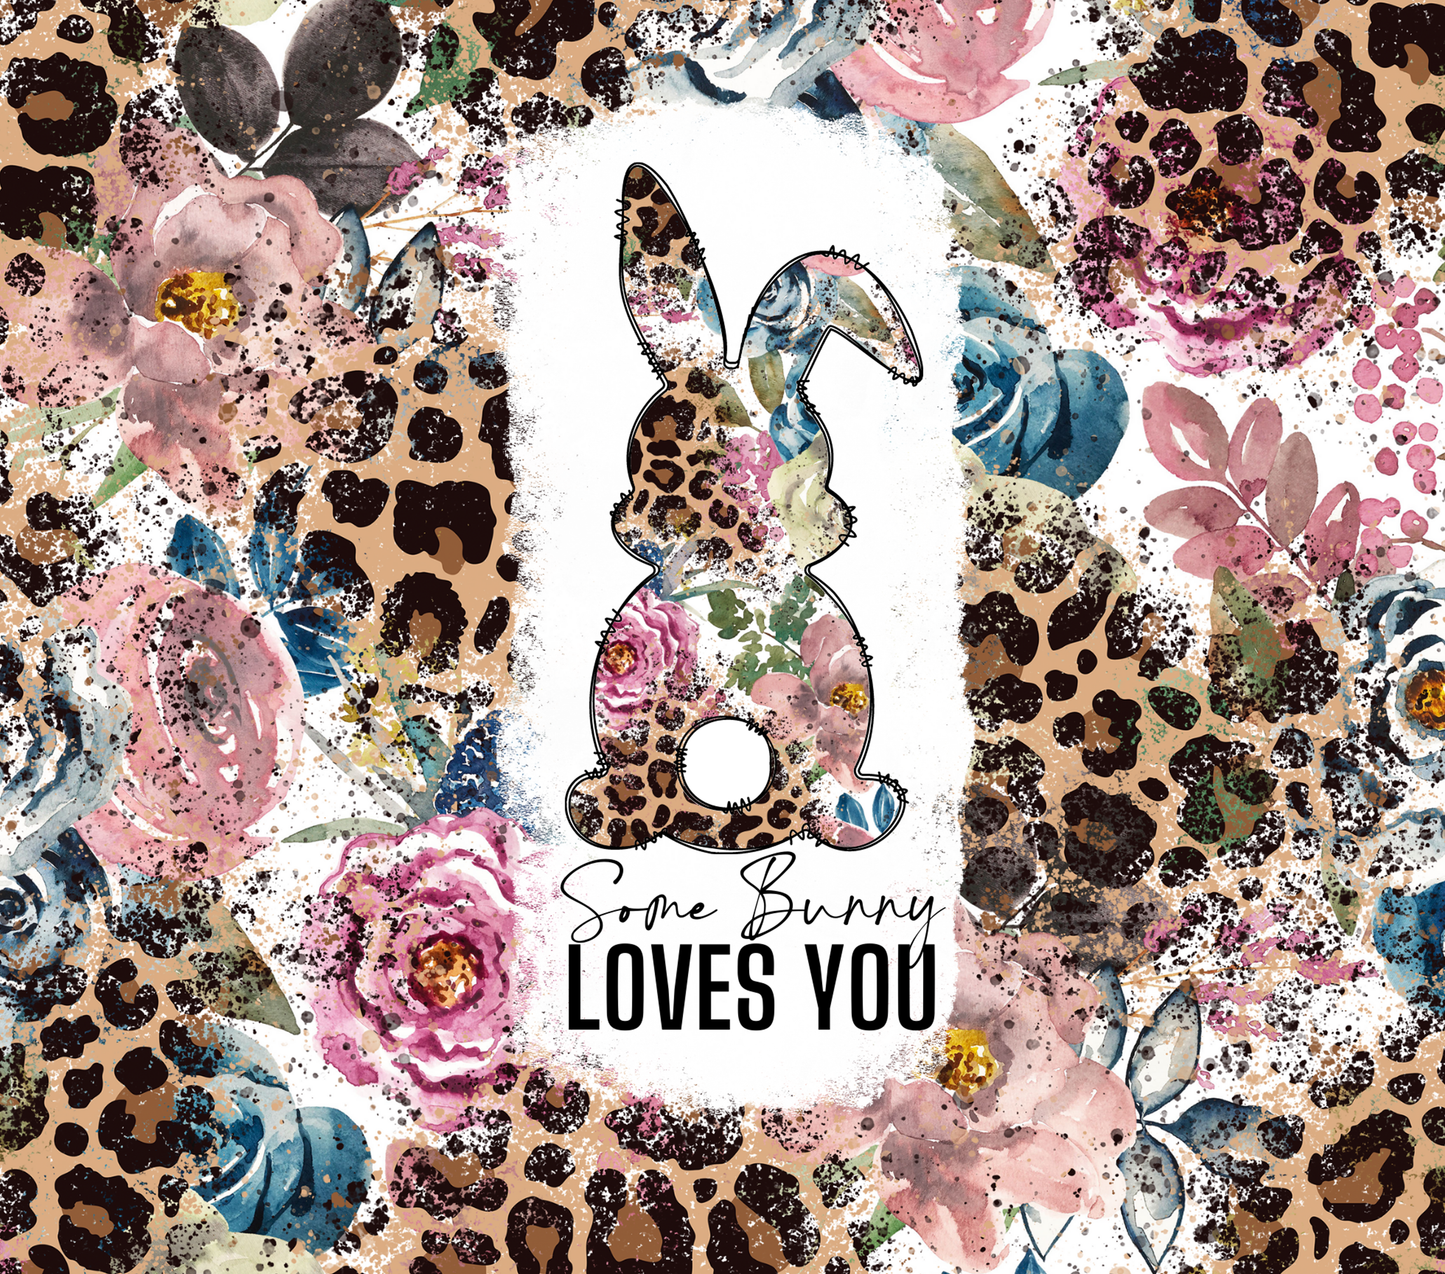 44 Some bunny loves you #6